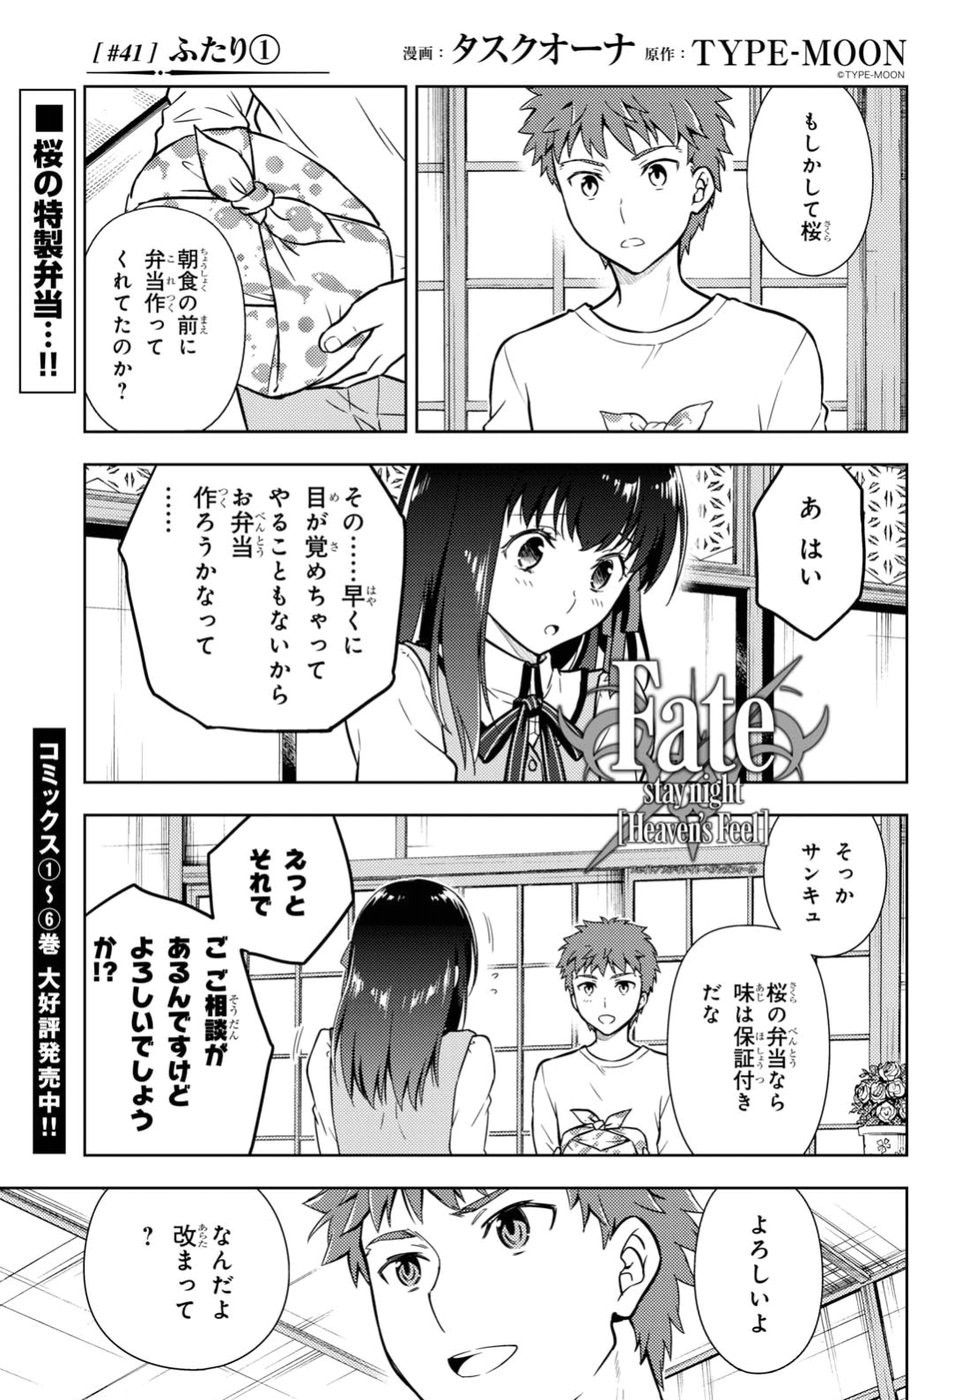 Fate/Stay night Heaven's Feel - Chapter 41 - Page 1